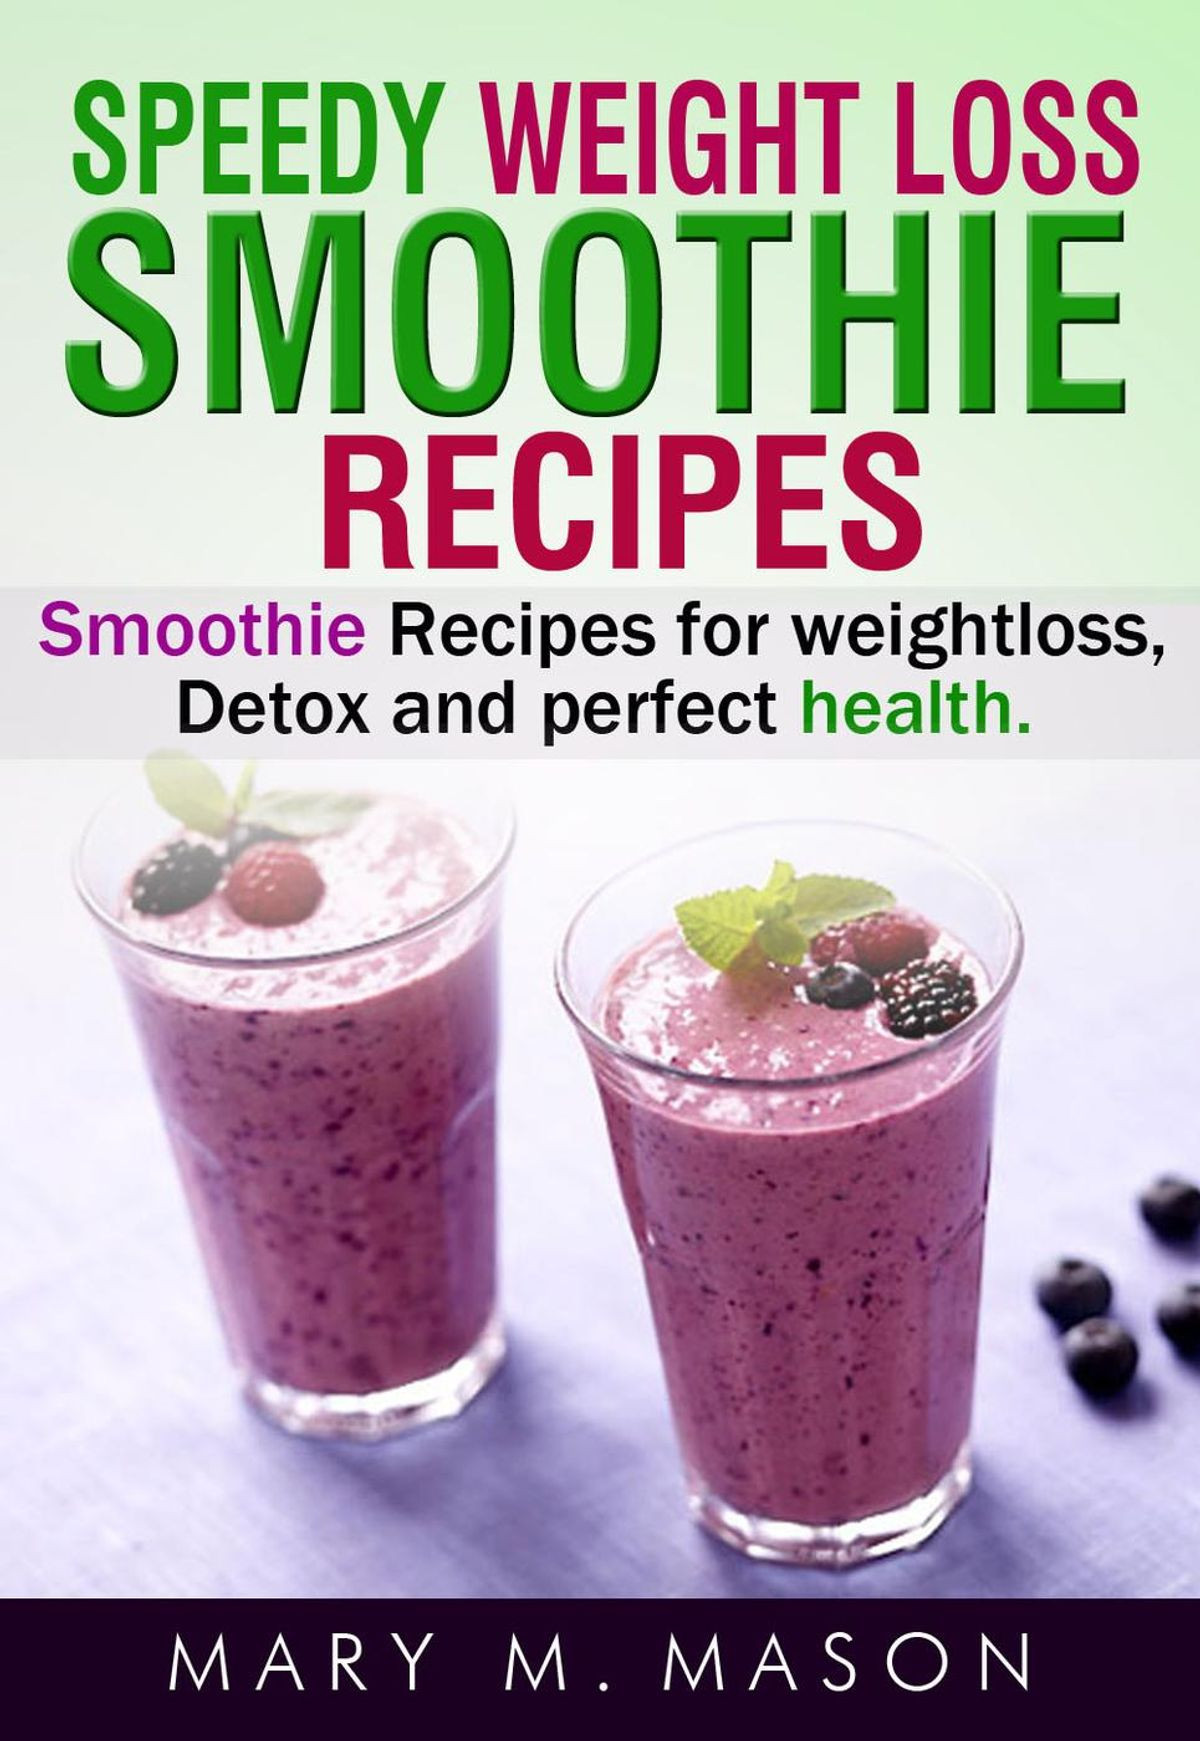 Smoothies For Weight Loss
 Speedy Weight Loss Smoothie Recipes Smoothie Recipes for